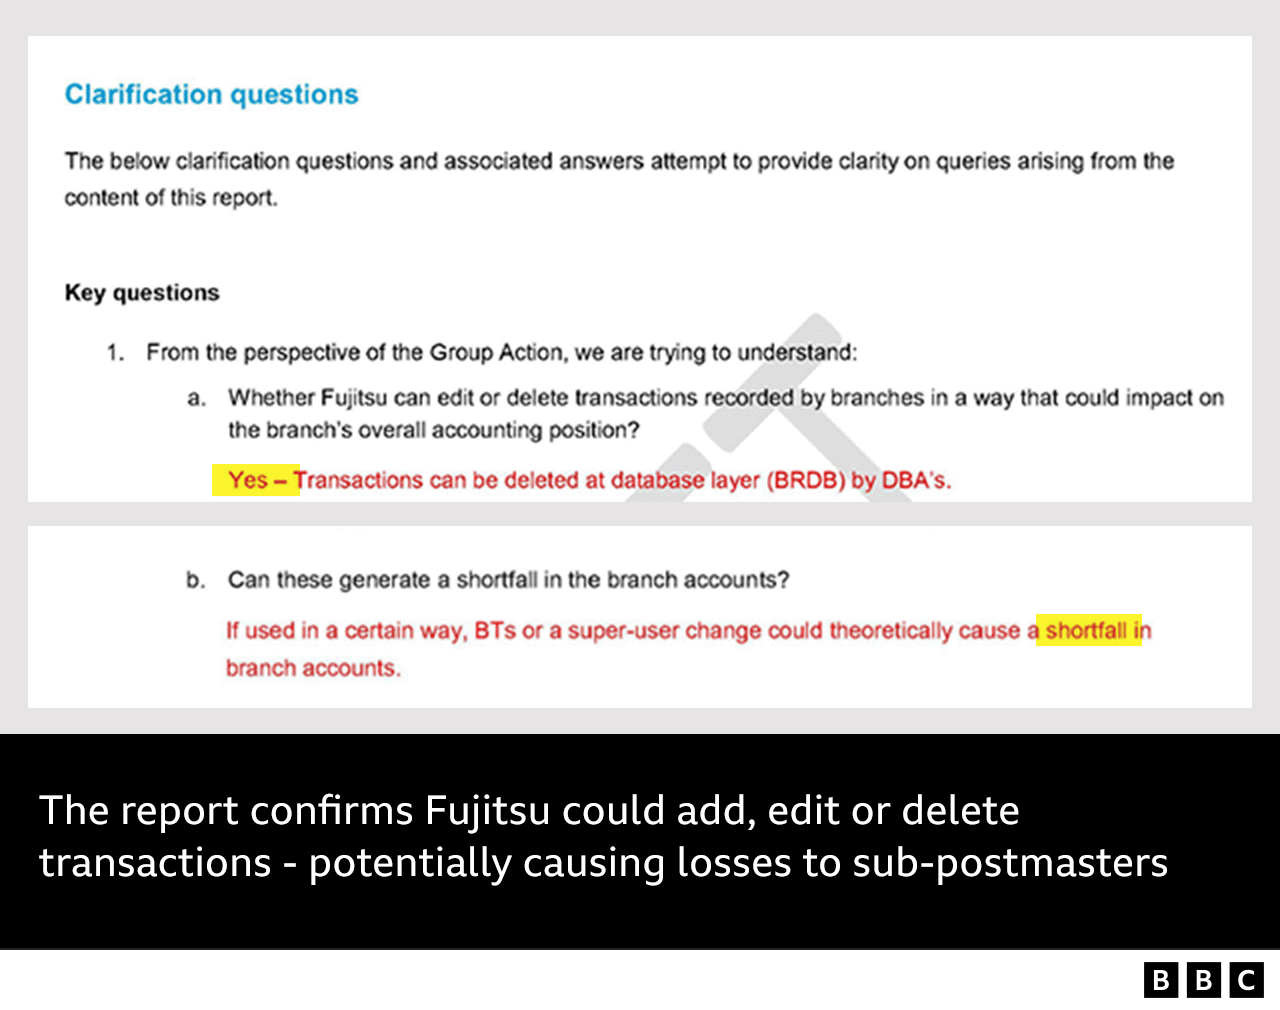 The report confirms Fujitsu could add, edit or delete transactions - potentially causing losses to sub-postmasters